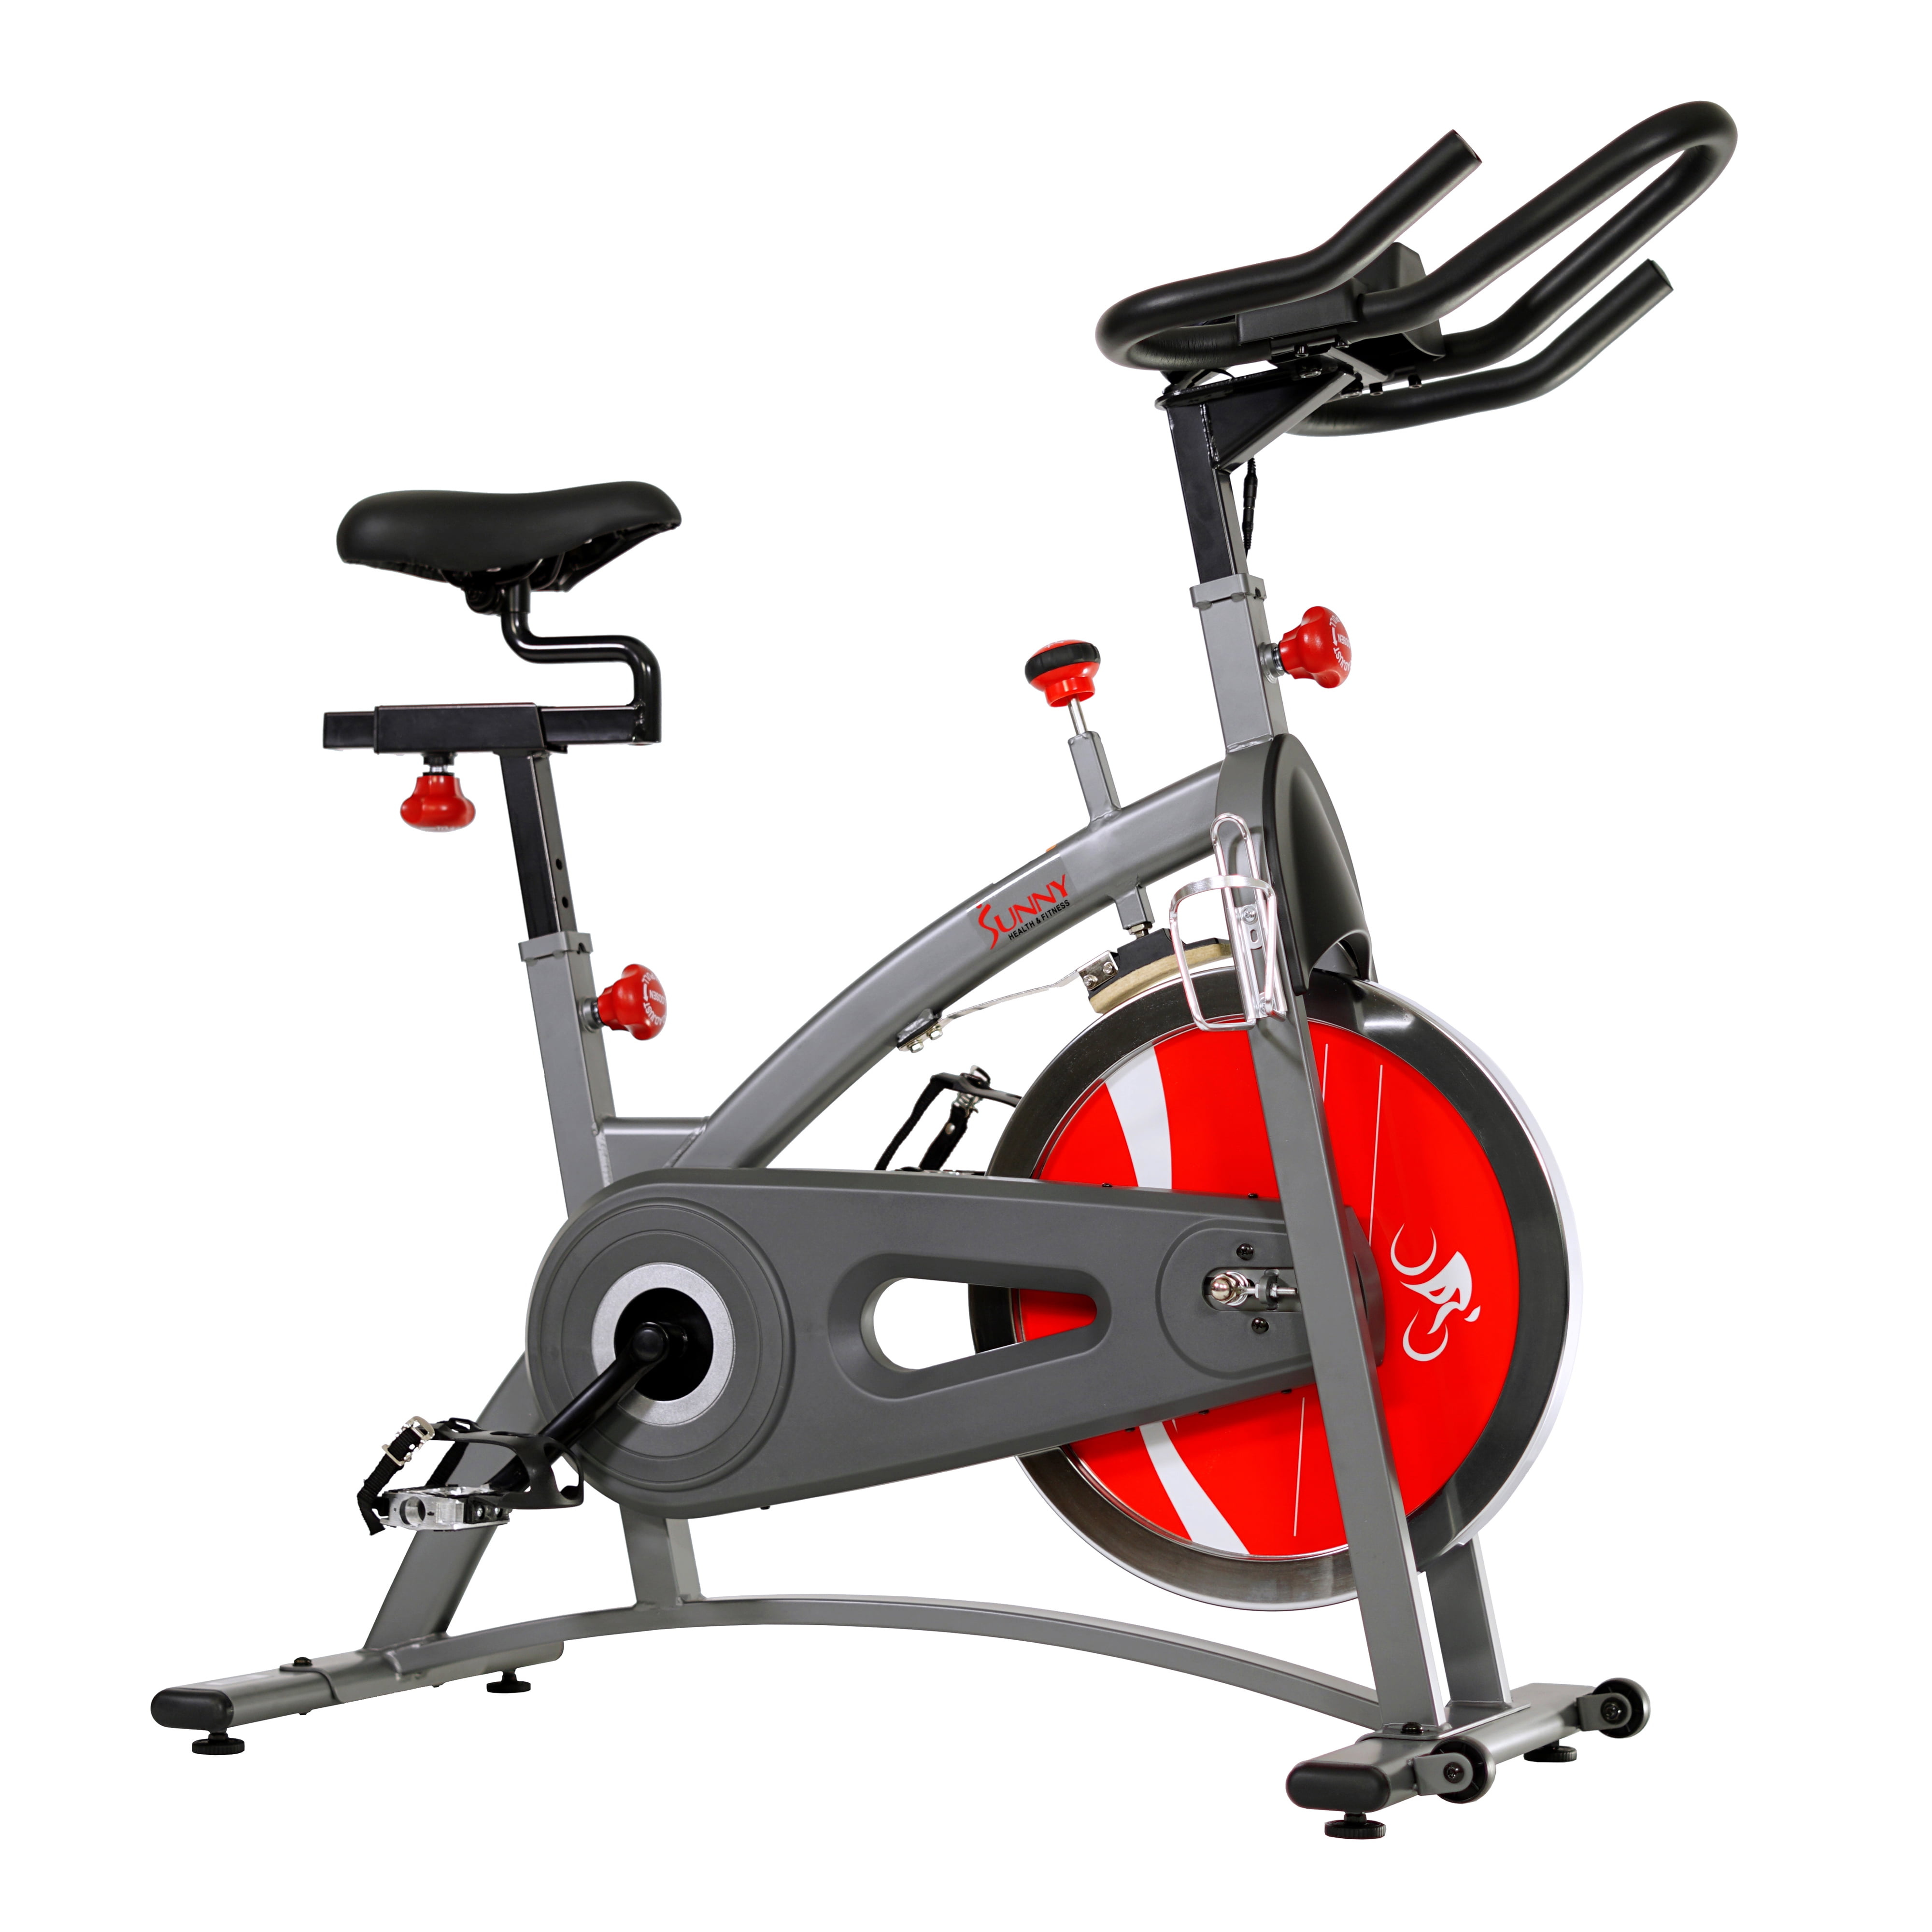 New Exercise Bike Health Fitness Indoor Cycling Bicycle Cardio Workout Home 